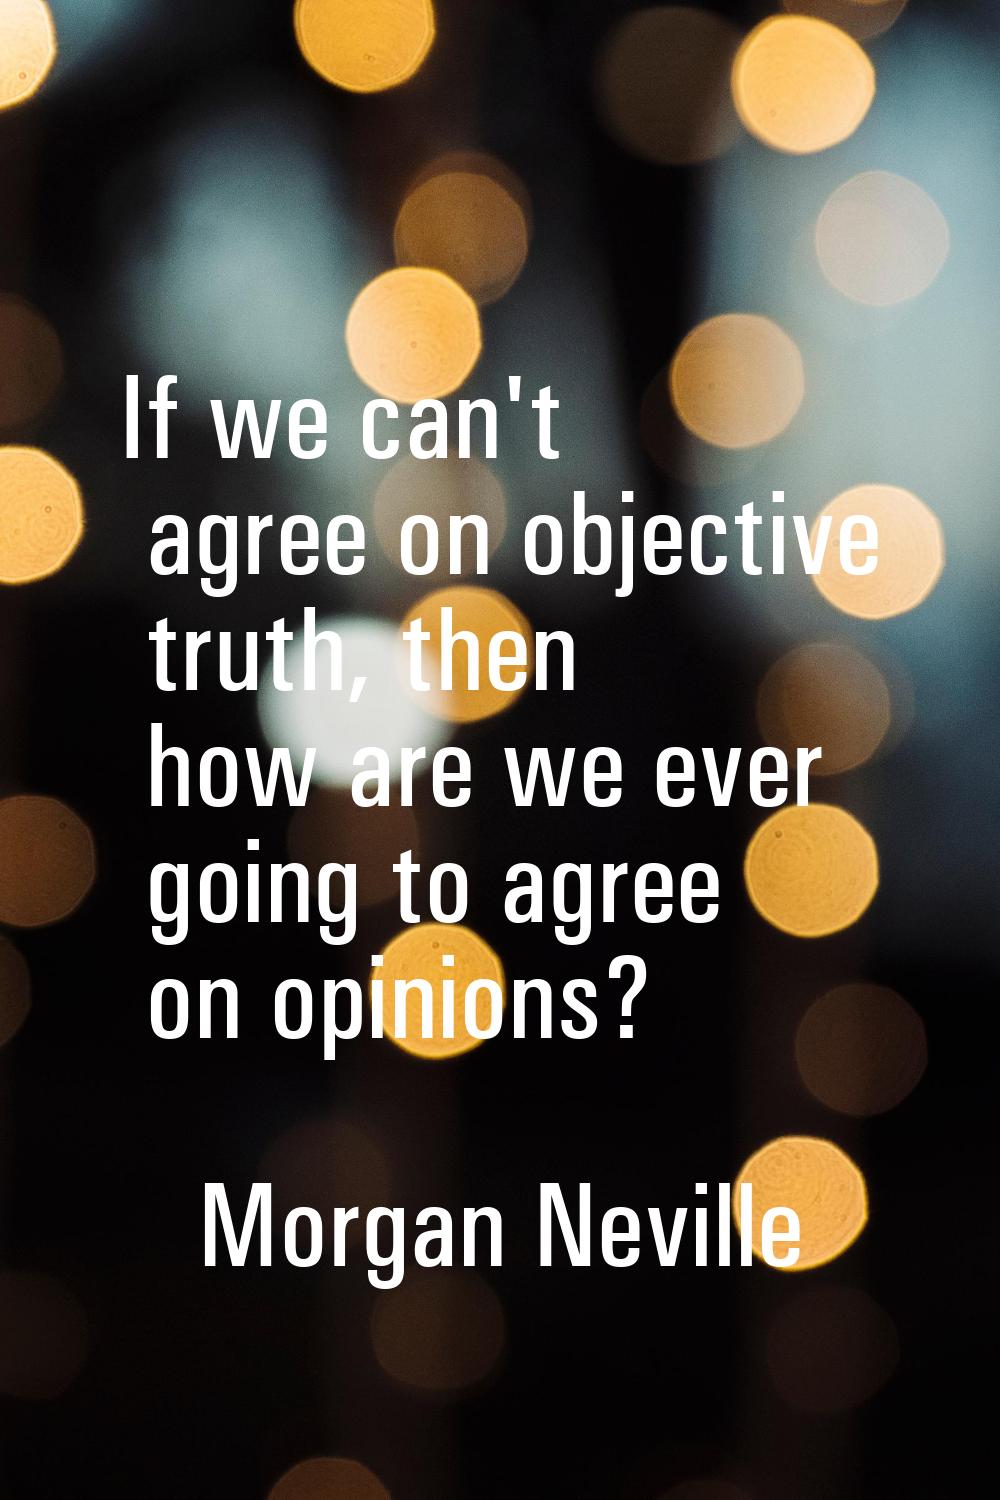 If we can't agree on objective truth, then how are we ever going to agree on opinions?